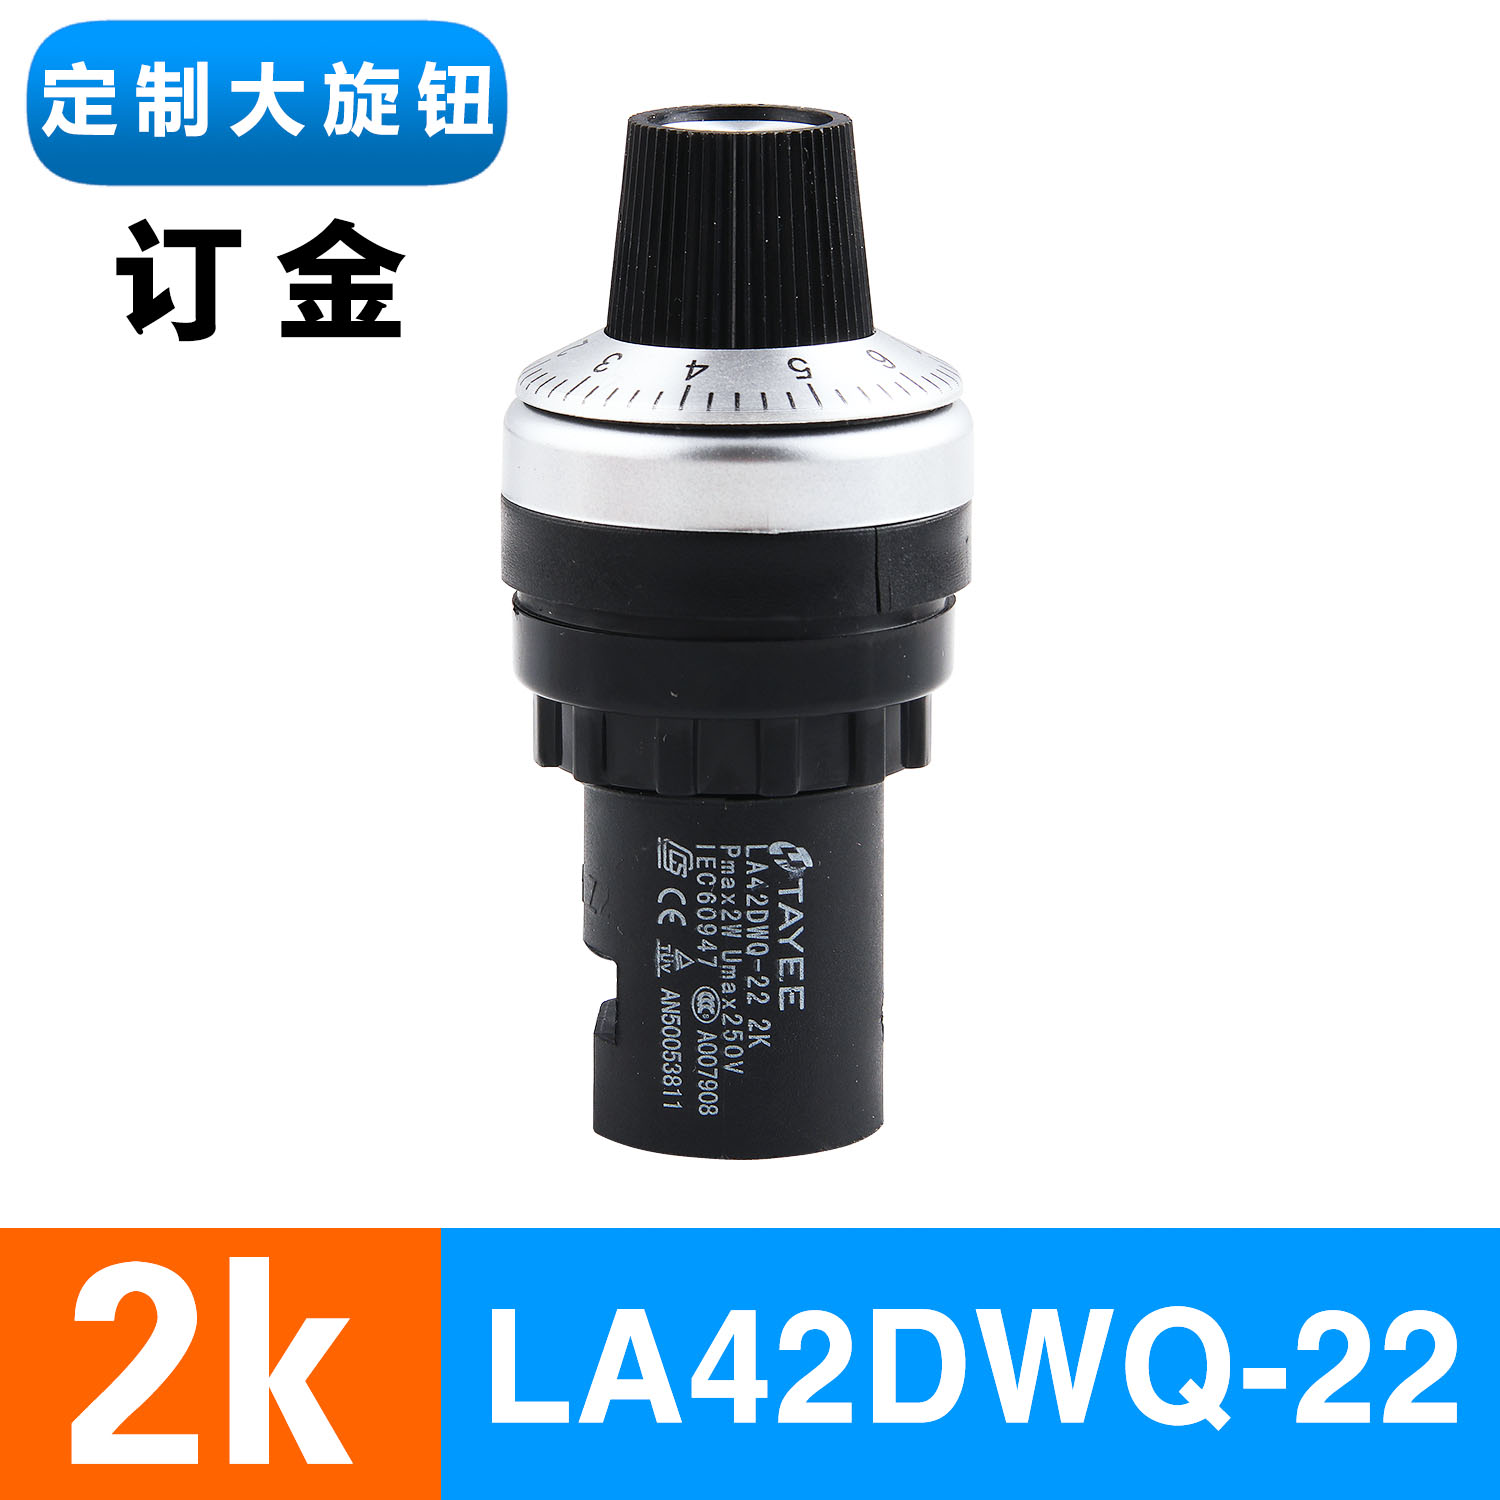 Custom Made 2Kquality goods Shanghai Tianyi Frequency converter adjust speed potentiometer precise LA42DWQ-22 governor 22mm5K10K